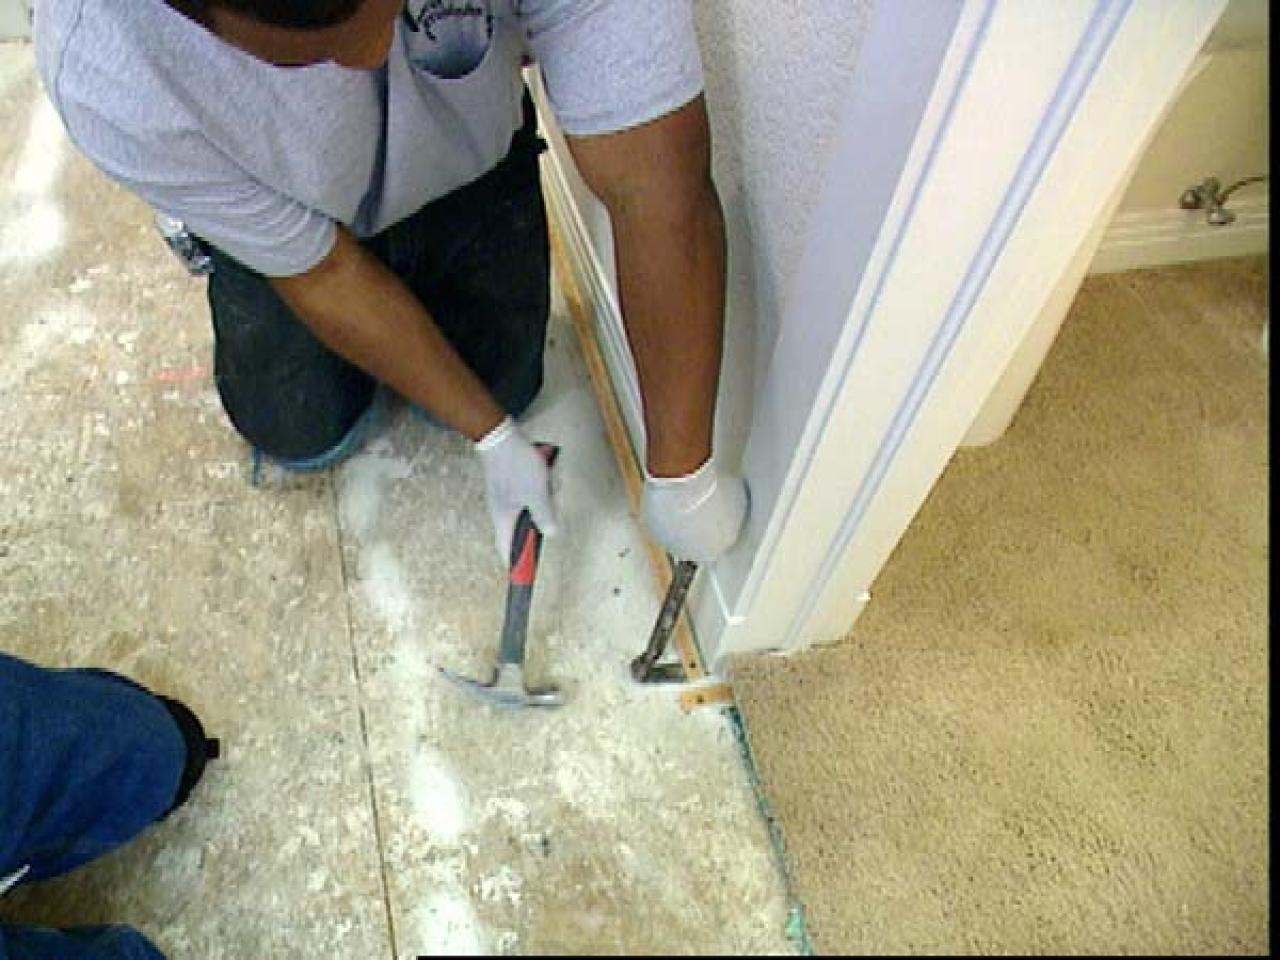 How To Install Tile Flooring Tos, How To Take Up Floor Tiles